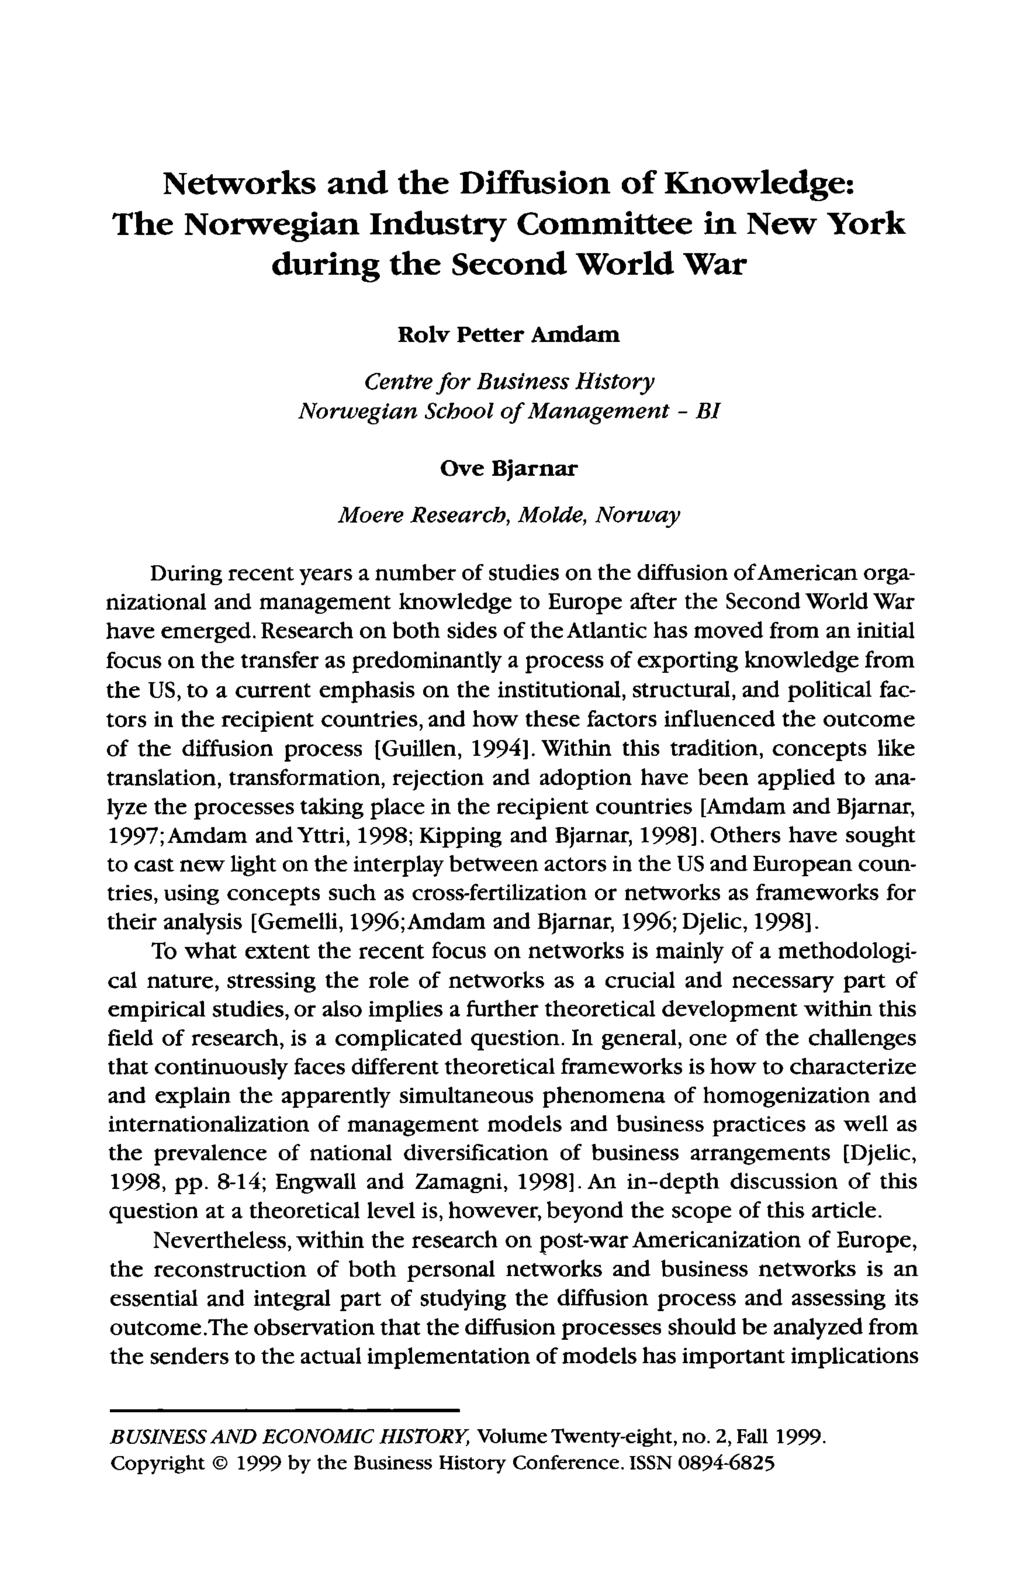 Networks and the Diffusion of Knowledge: The Norwegian Industry Committee in New York during the Second World War Rolv Petter Amdam Centre for Business History Norwegian School of Management - BI